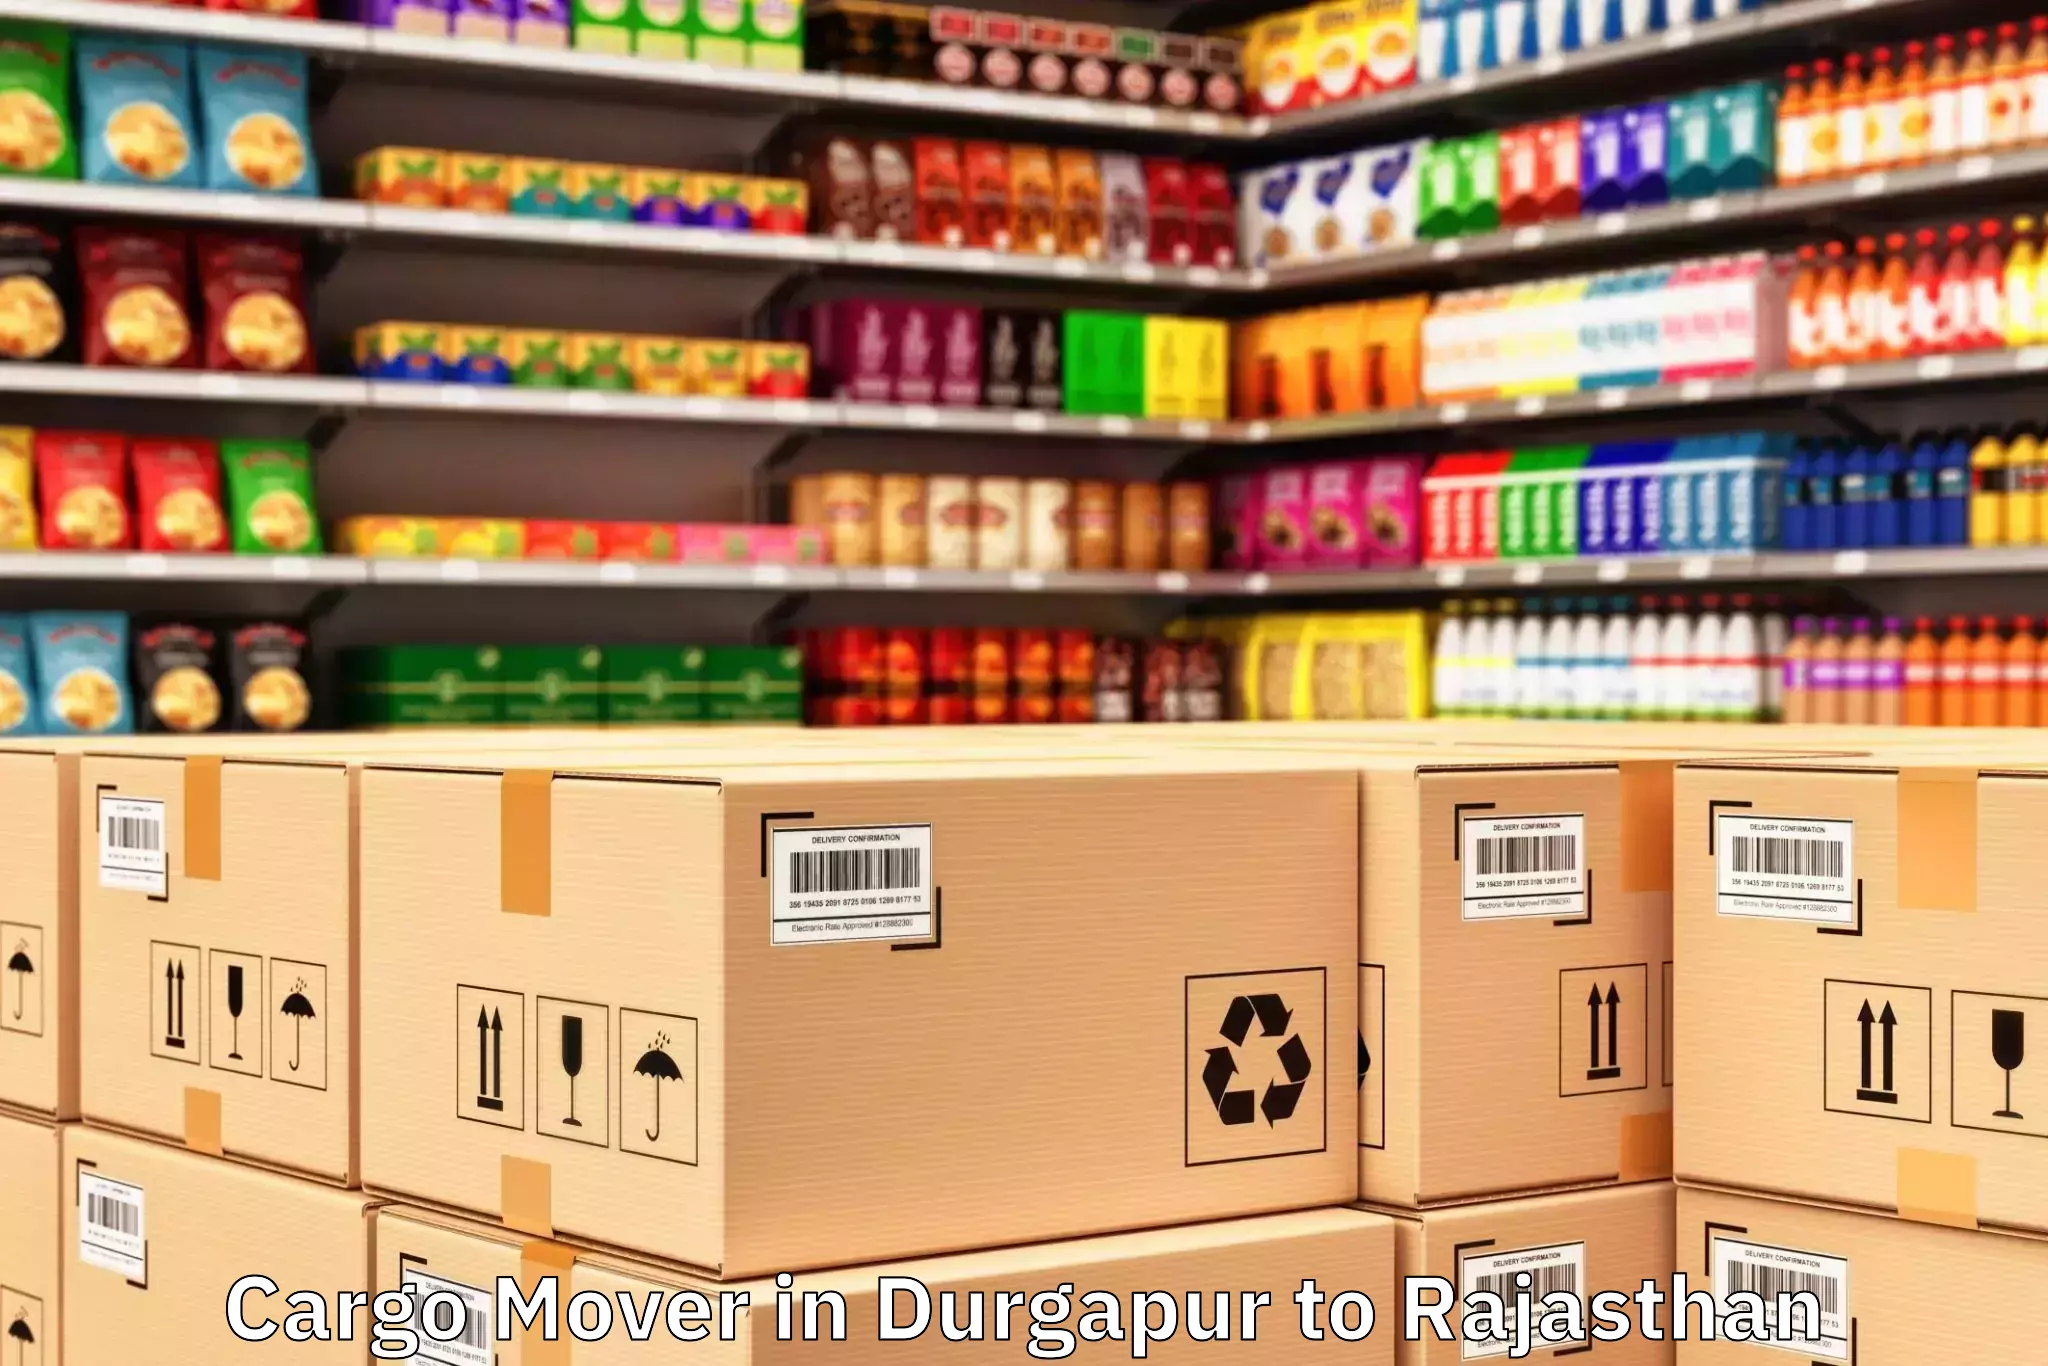 Durgapur to Rajasthan Cargo Mover Booking